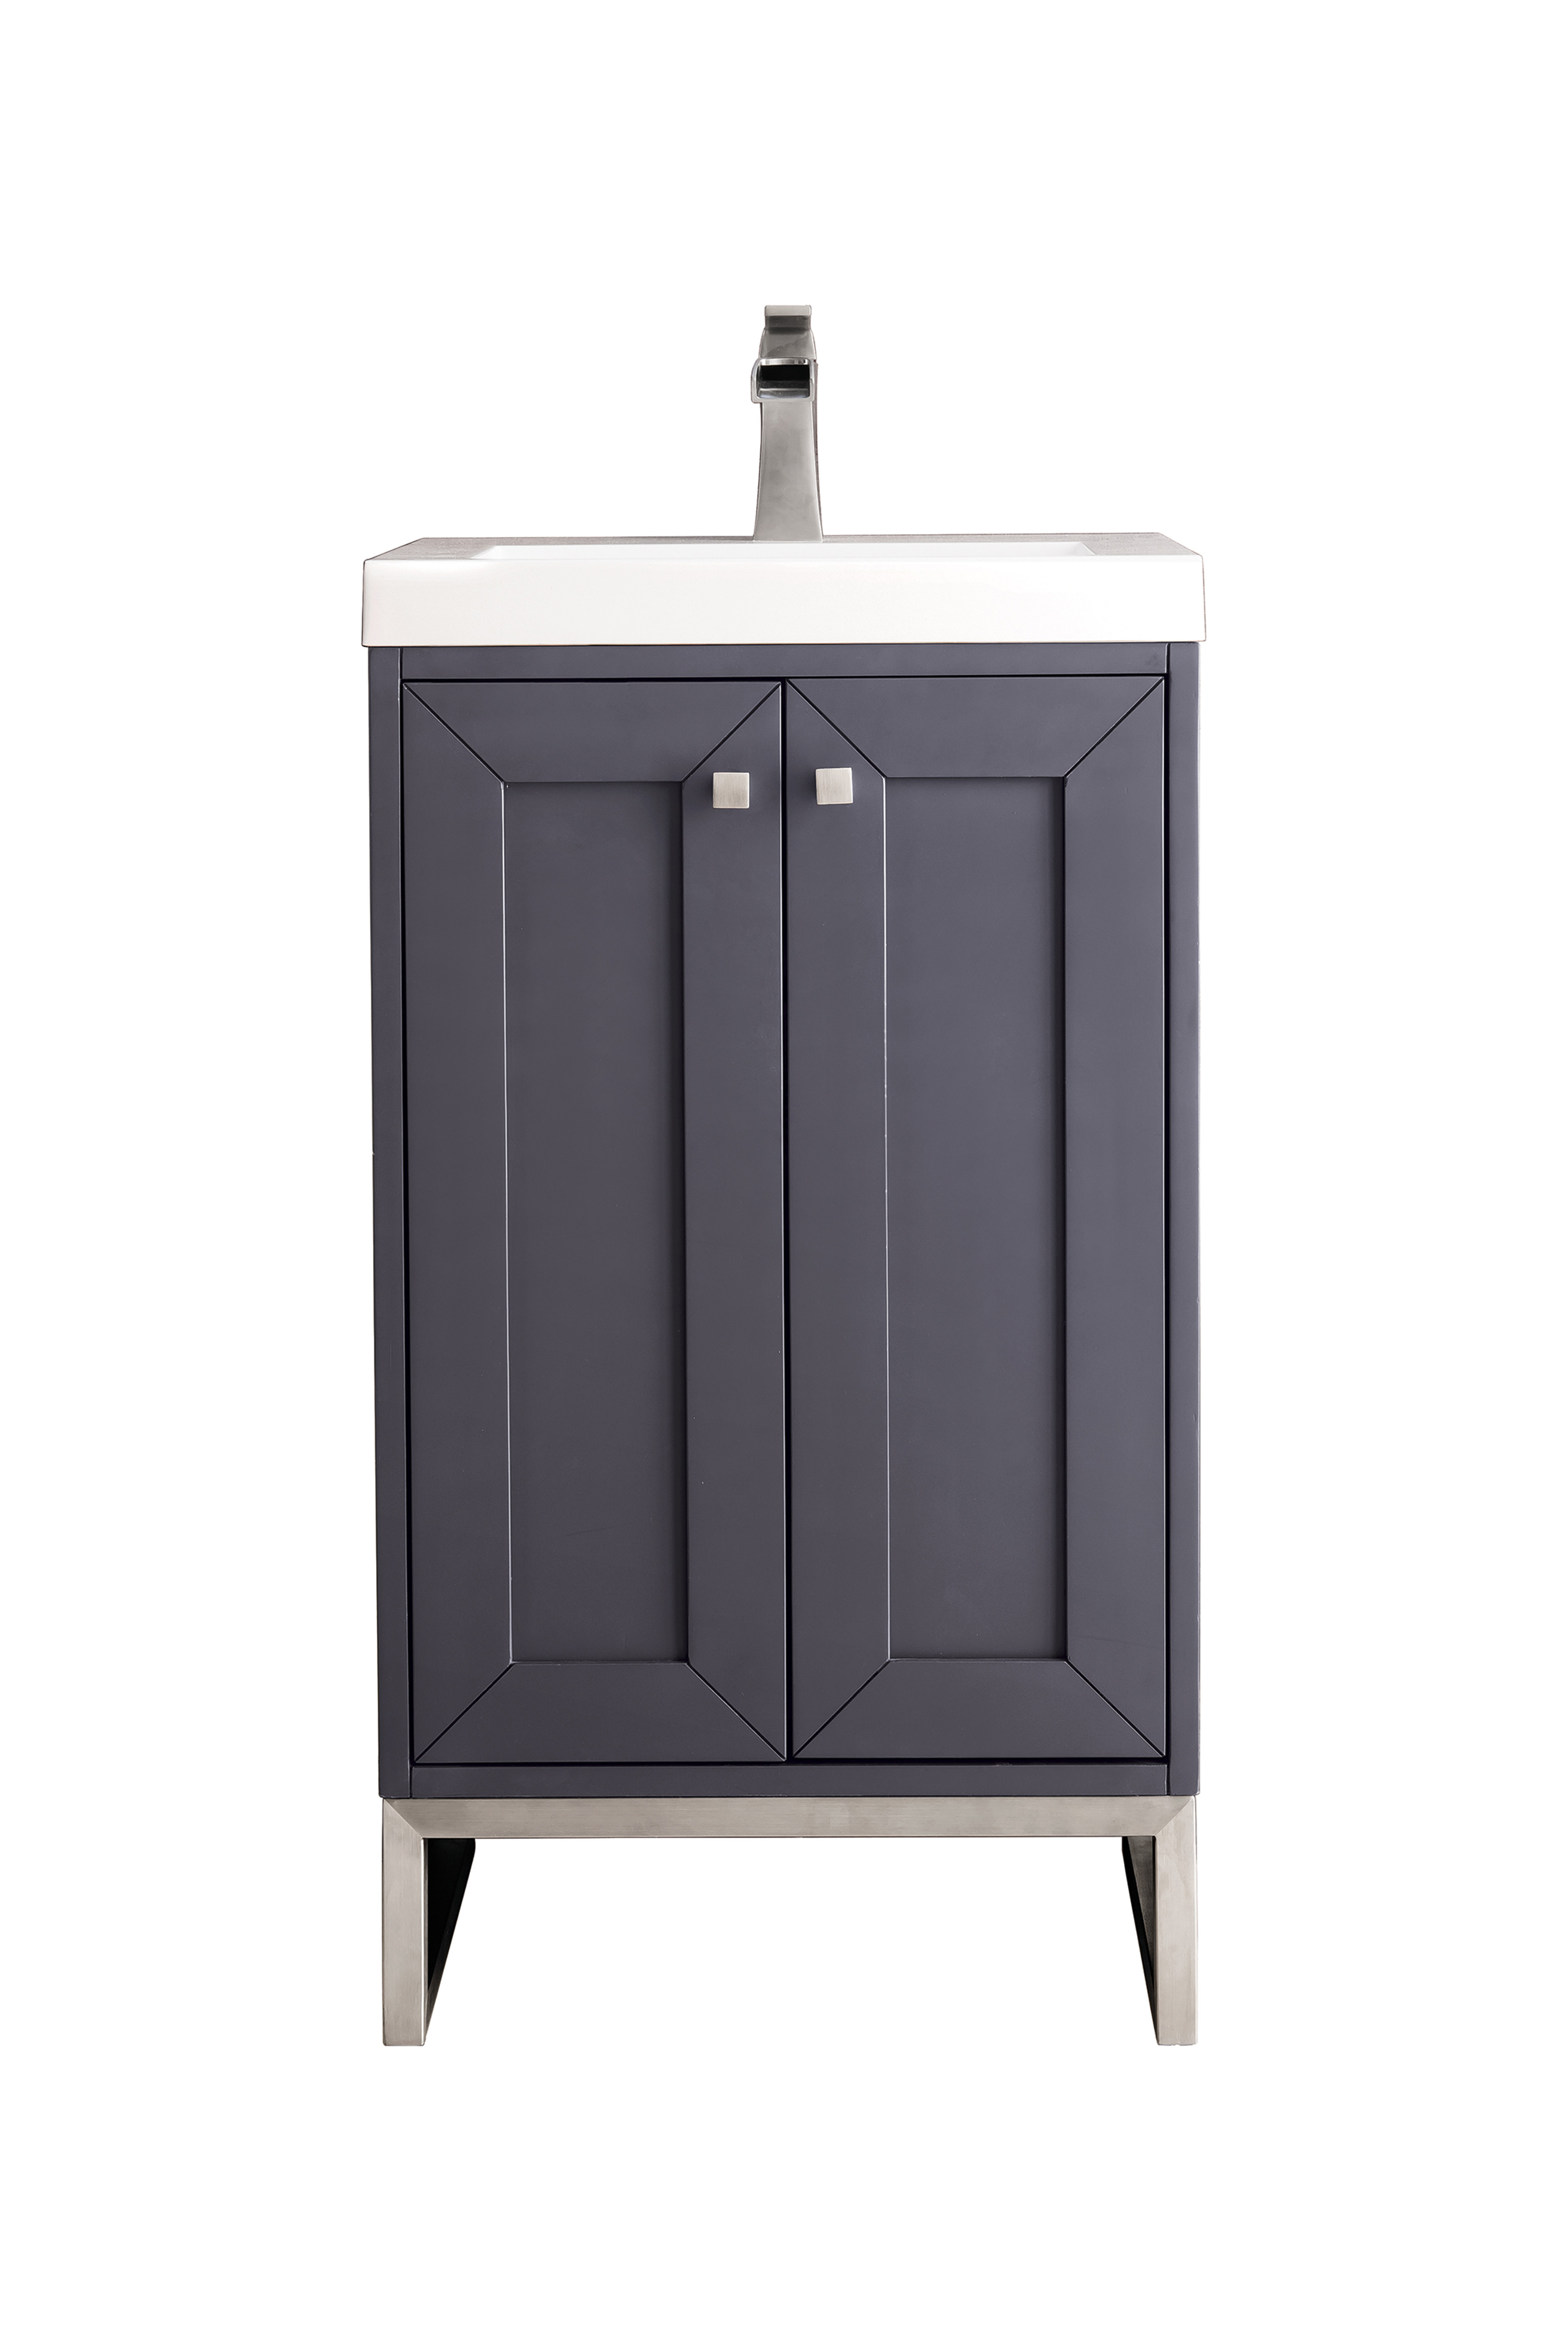 James Martin E303V20MGBNKWG Chianti 20" Single Vanity Cabinet, Mineral Grey, Brushed Nickel, w/ White Glossy Composite Countertop